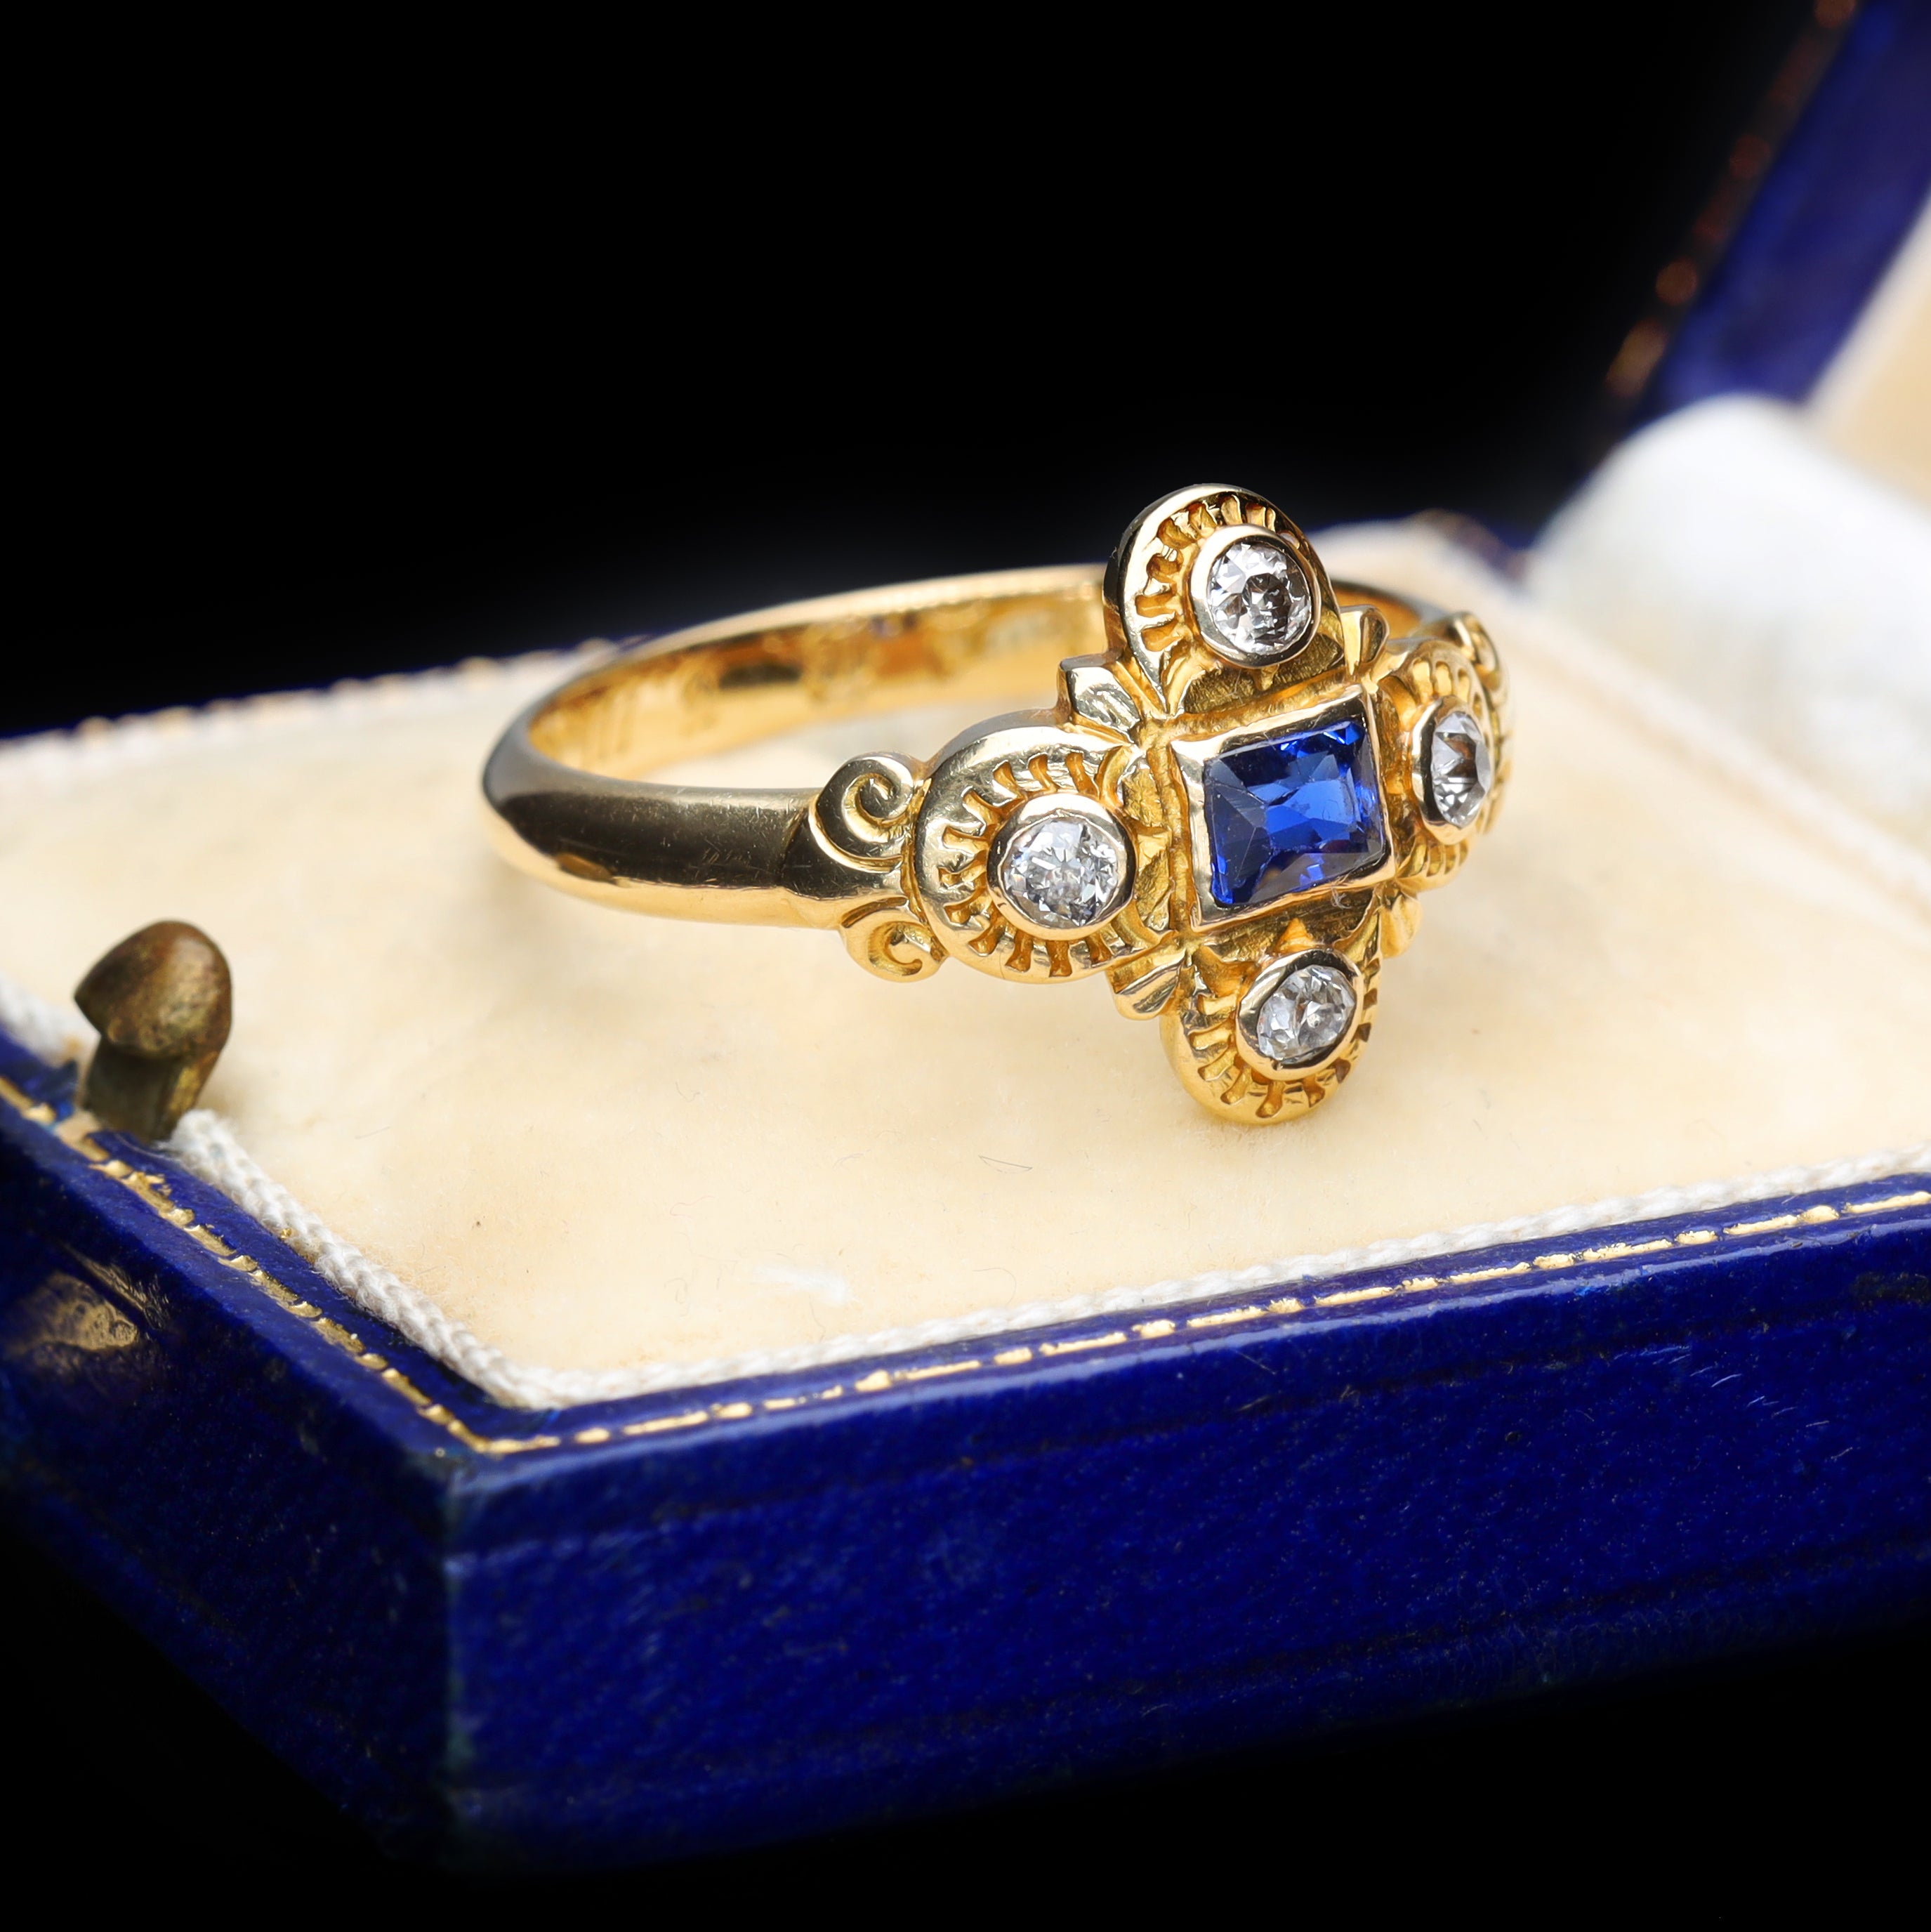 The Vintage Sapphire and Diamond Hand Carved Ring - Antique Jewellers